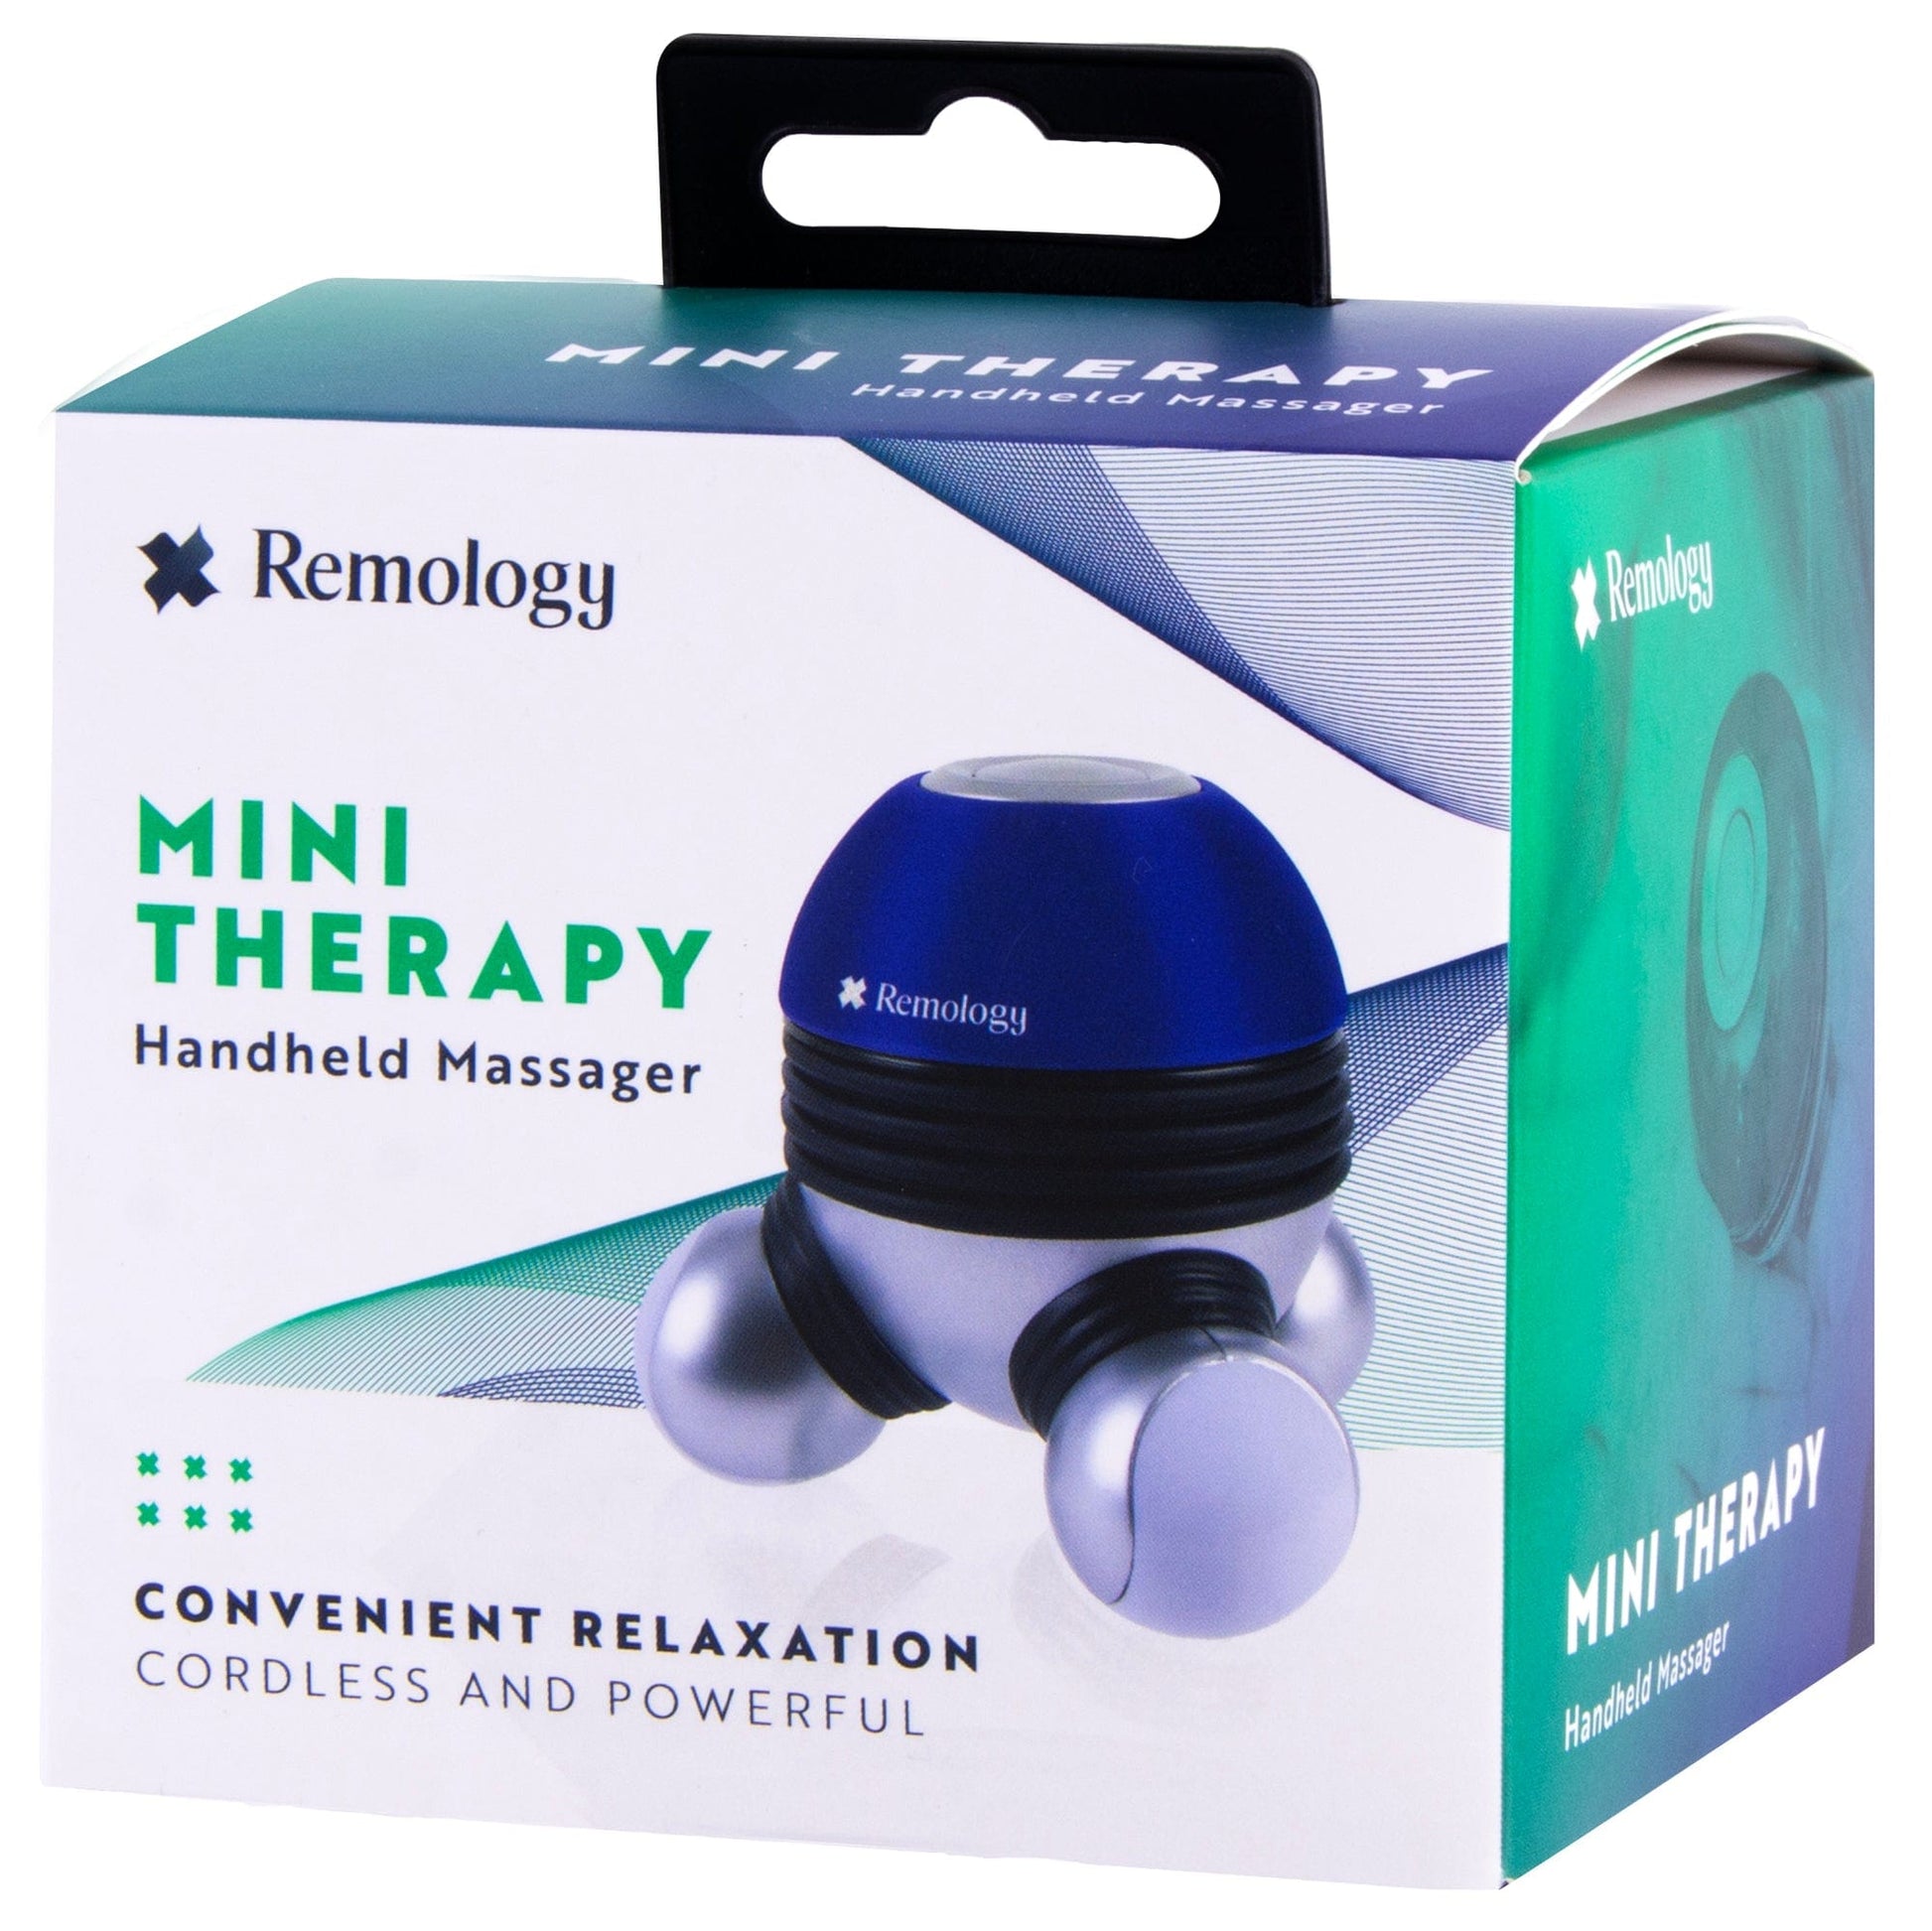 Remology personal care Mini Therapy Handheld Massager